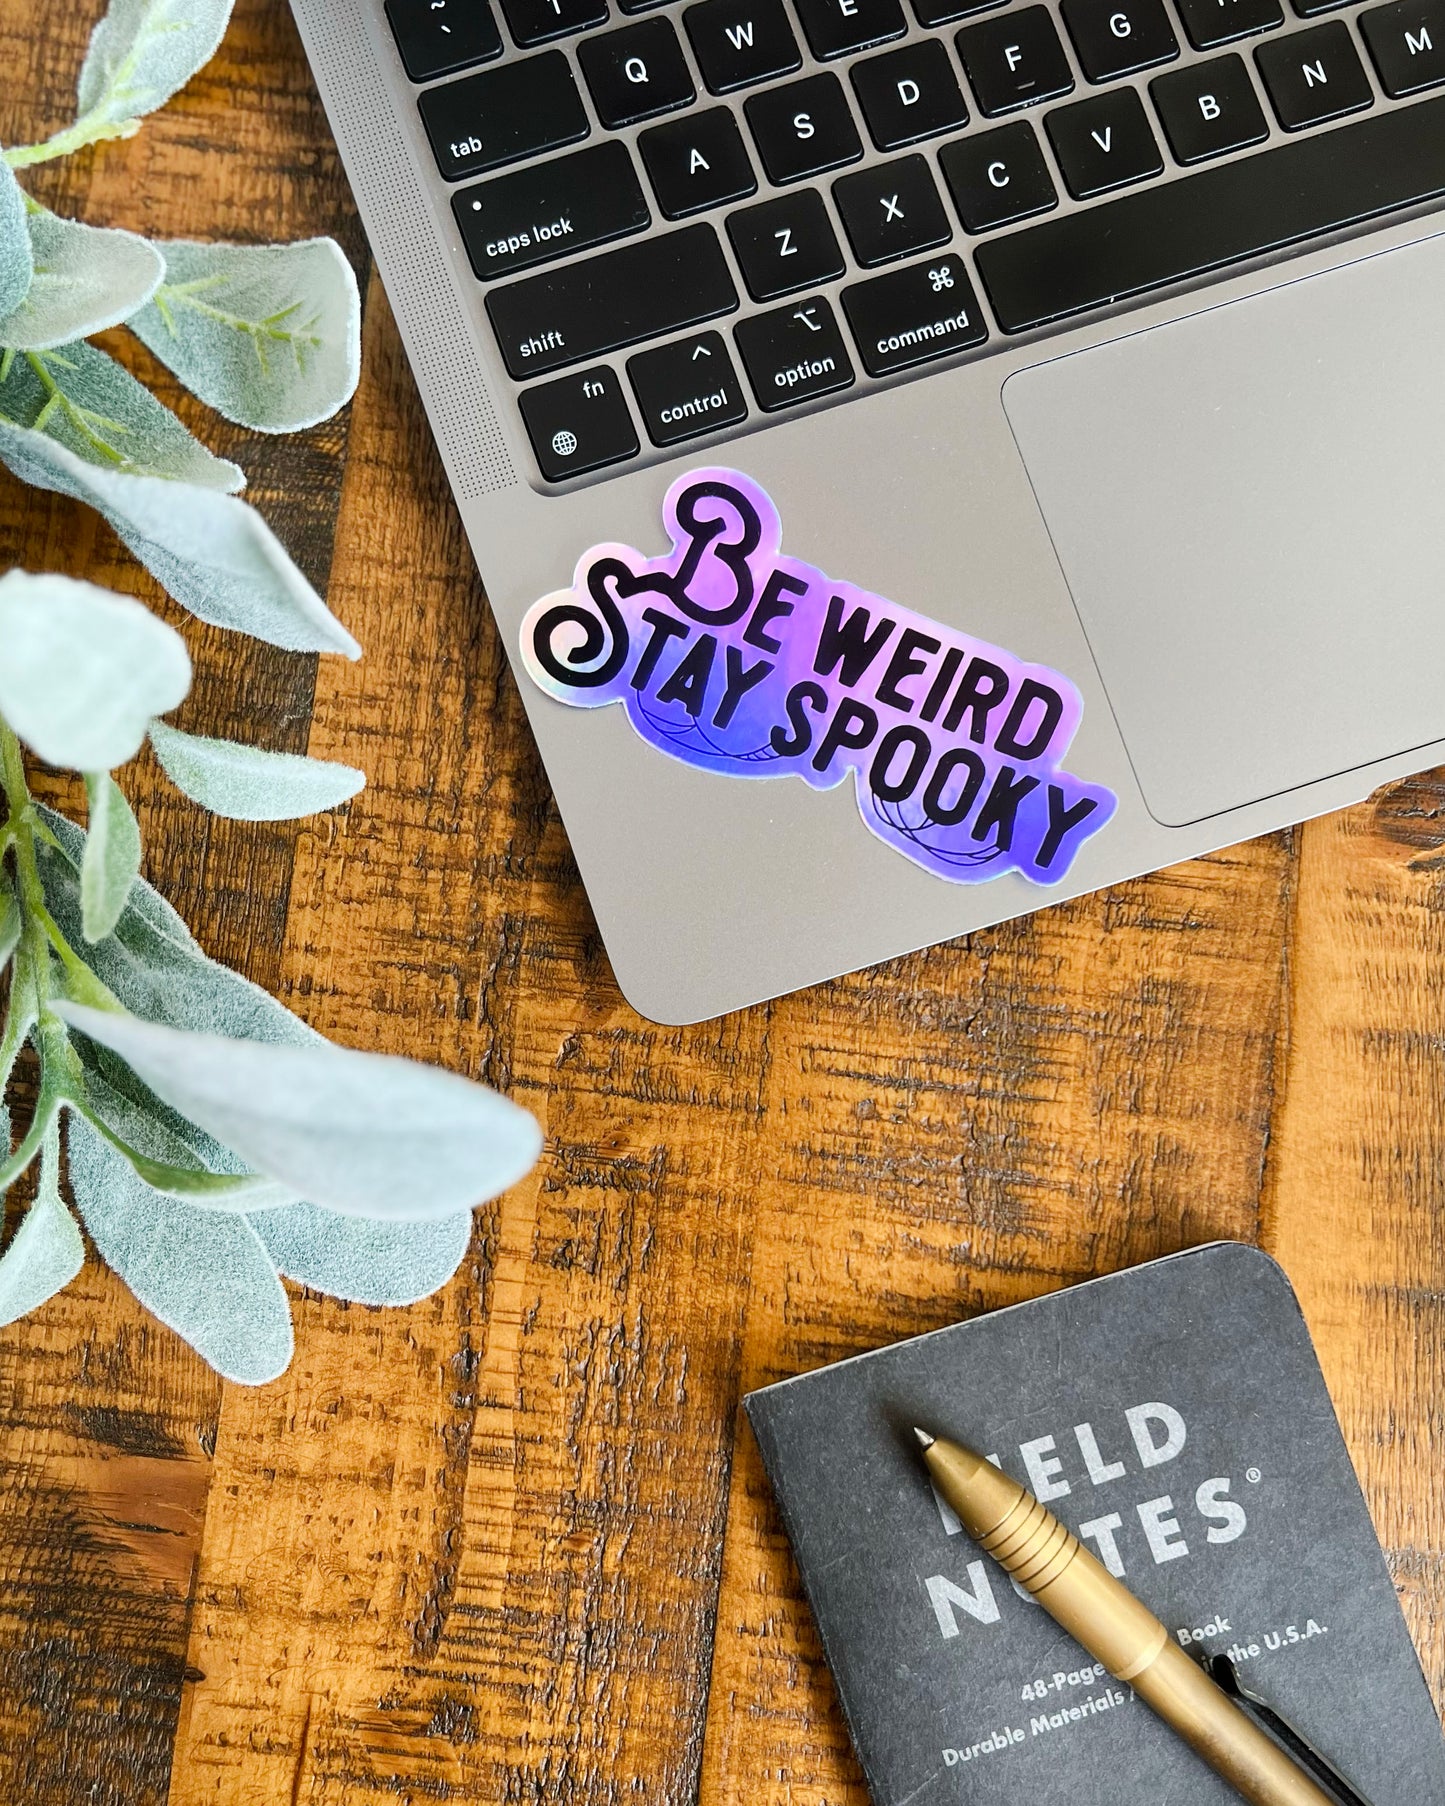 Be Weird Stay Spooky Holographic Sticker